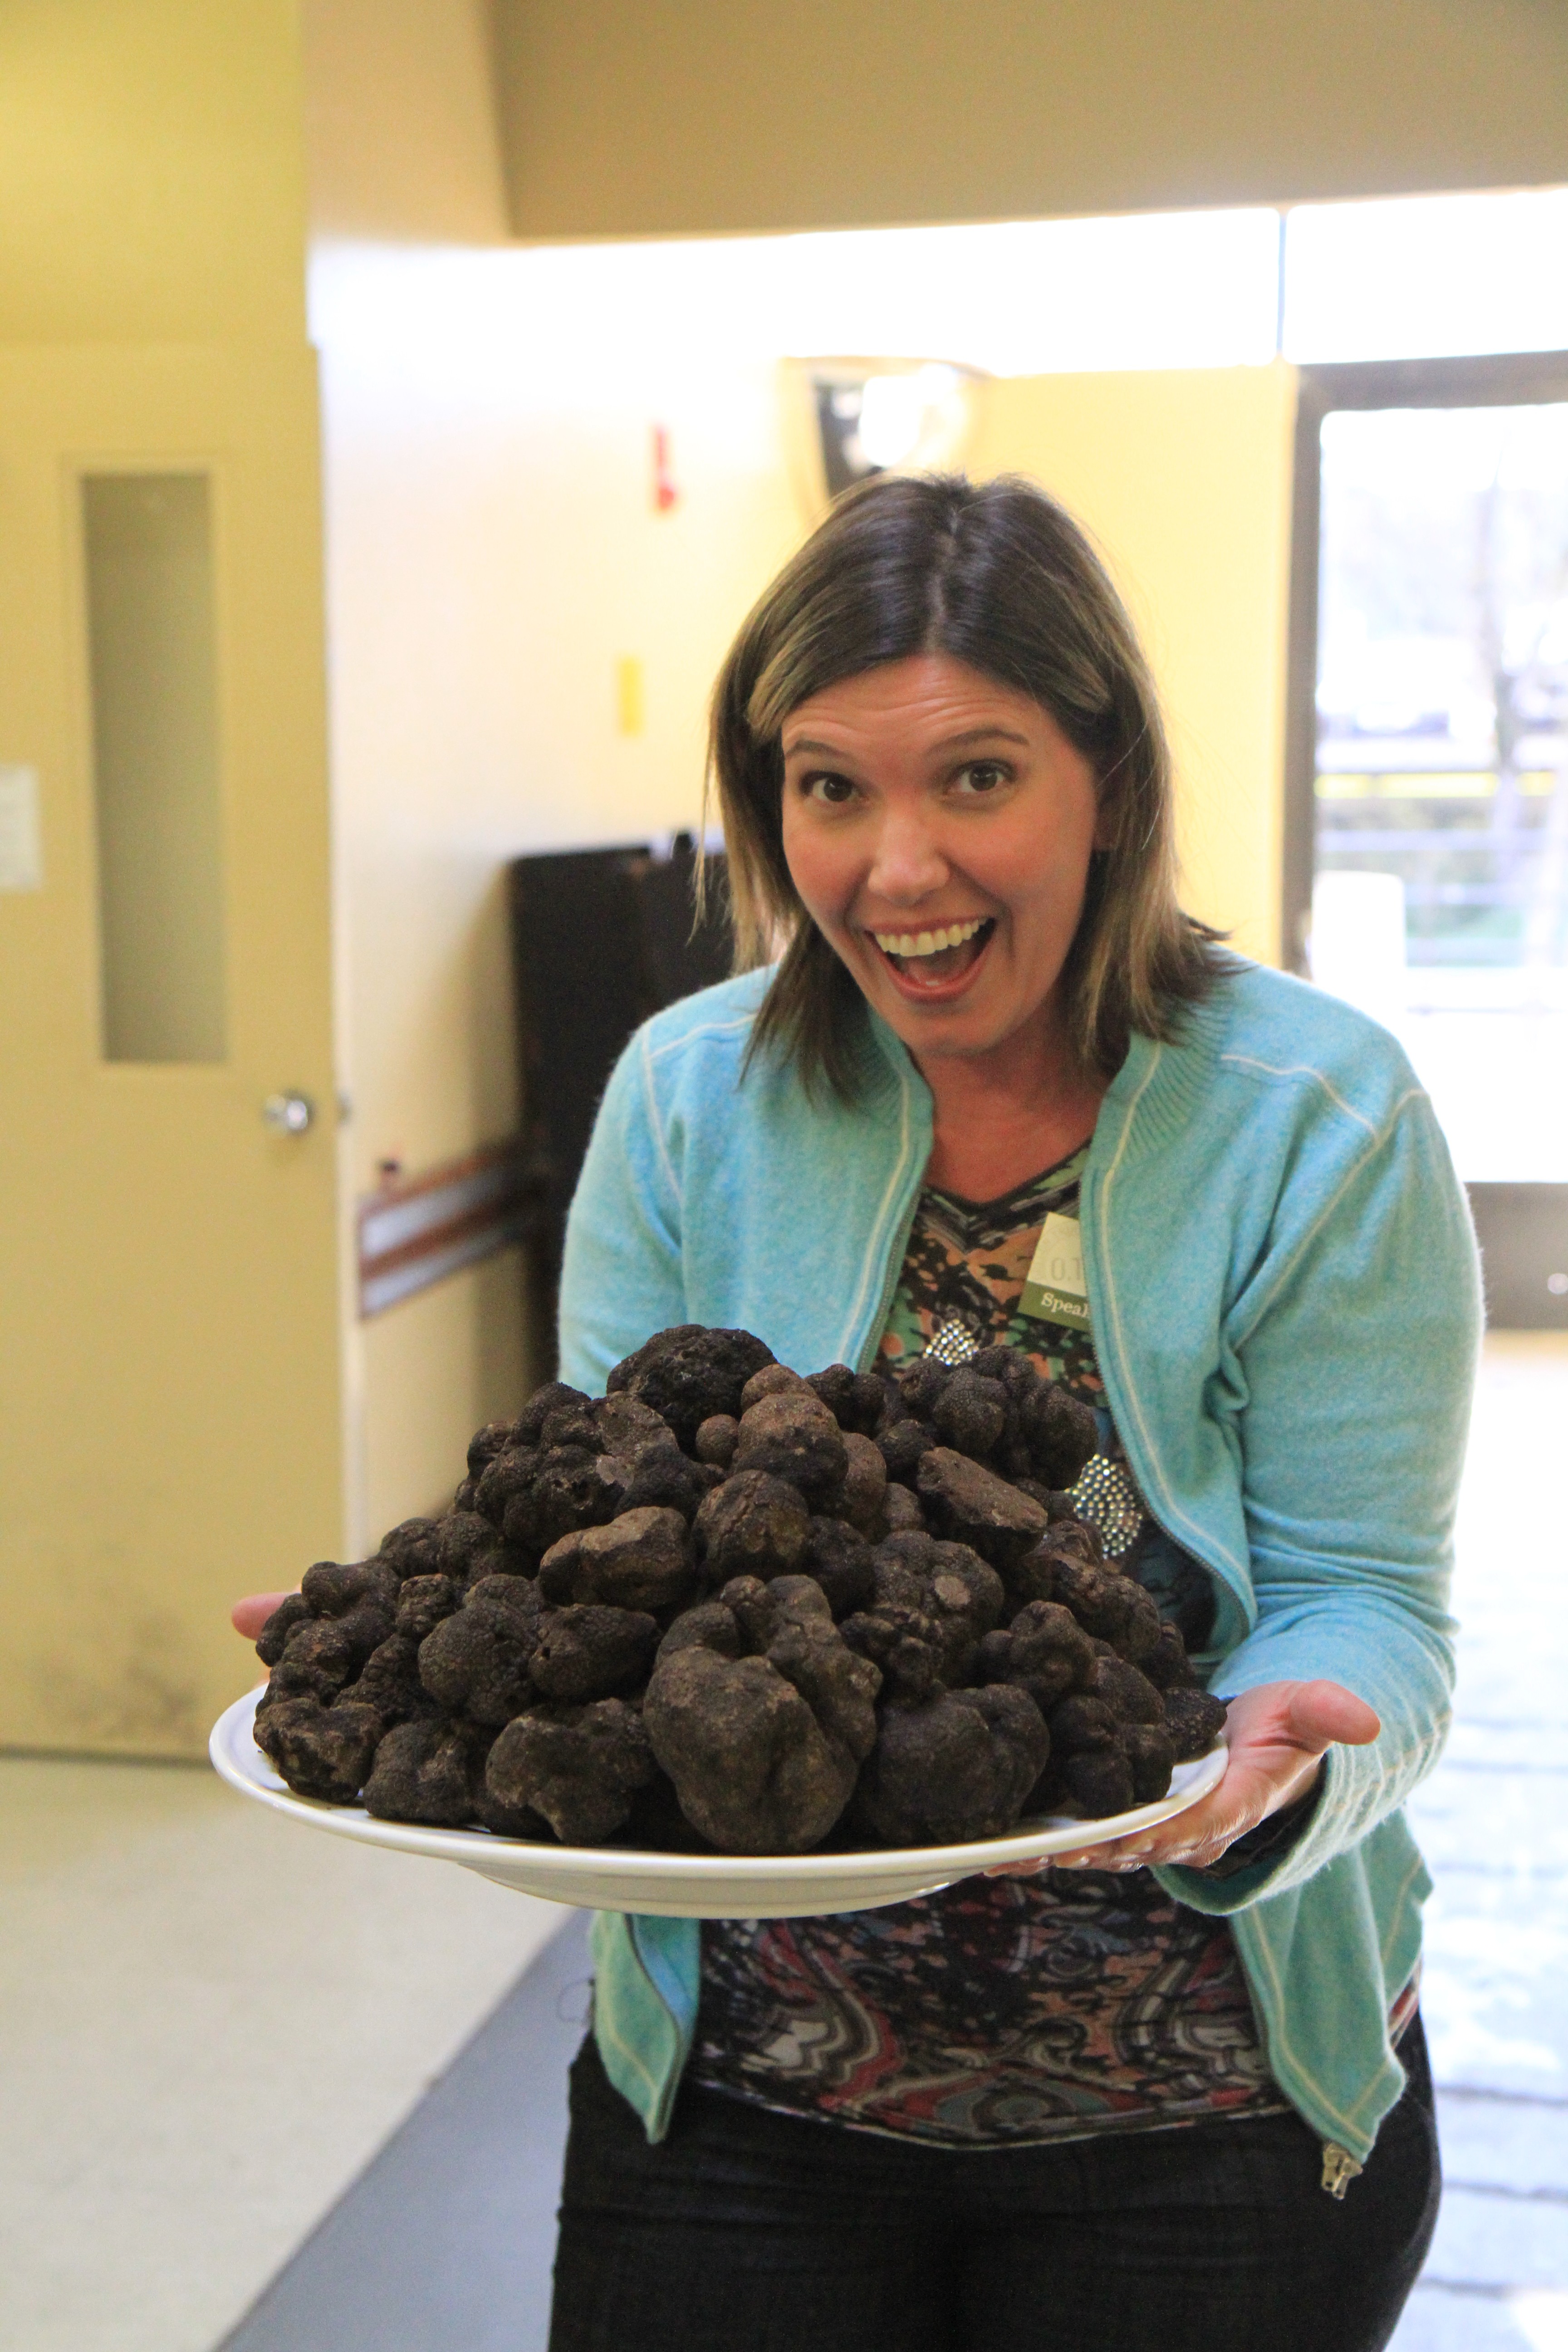 yours truly holding 17 pounds of French perigord truffles- $1100/pound. Do the math.